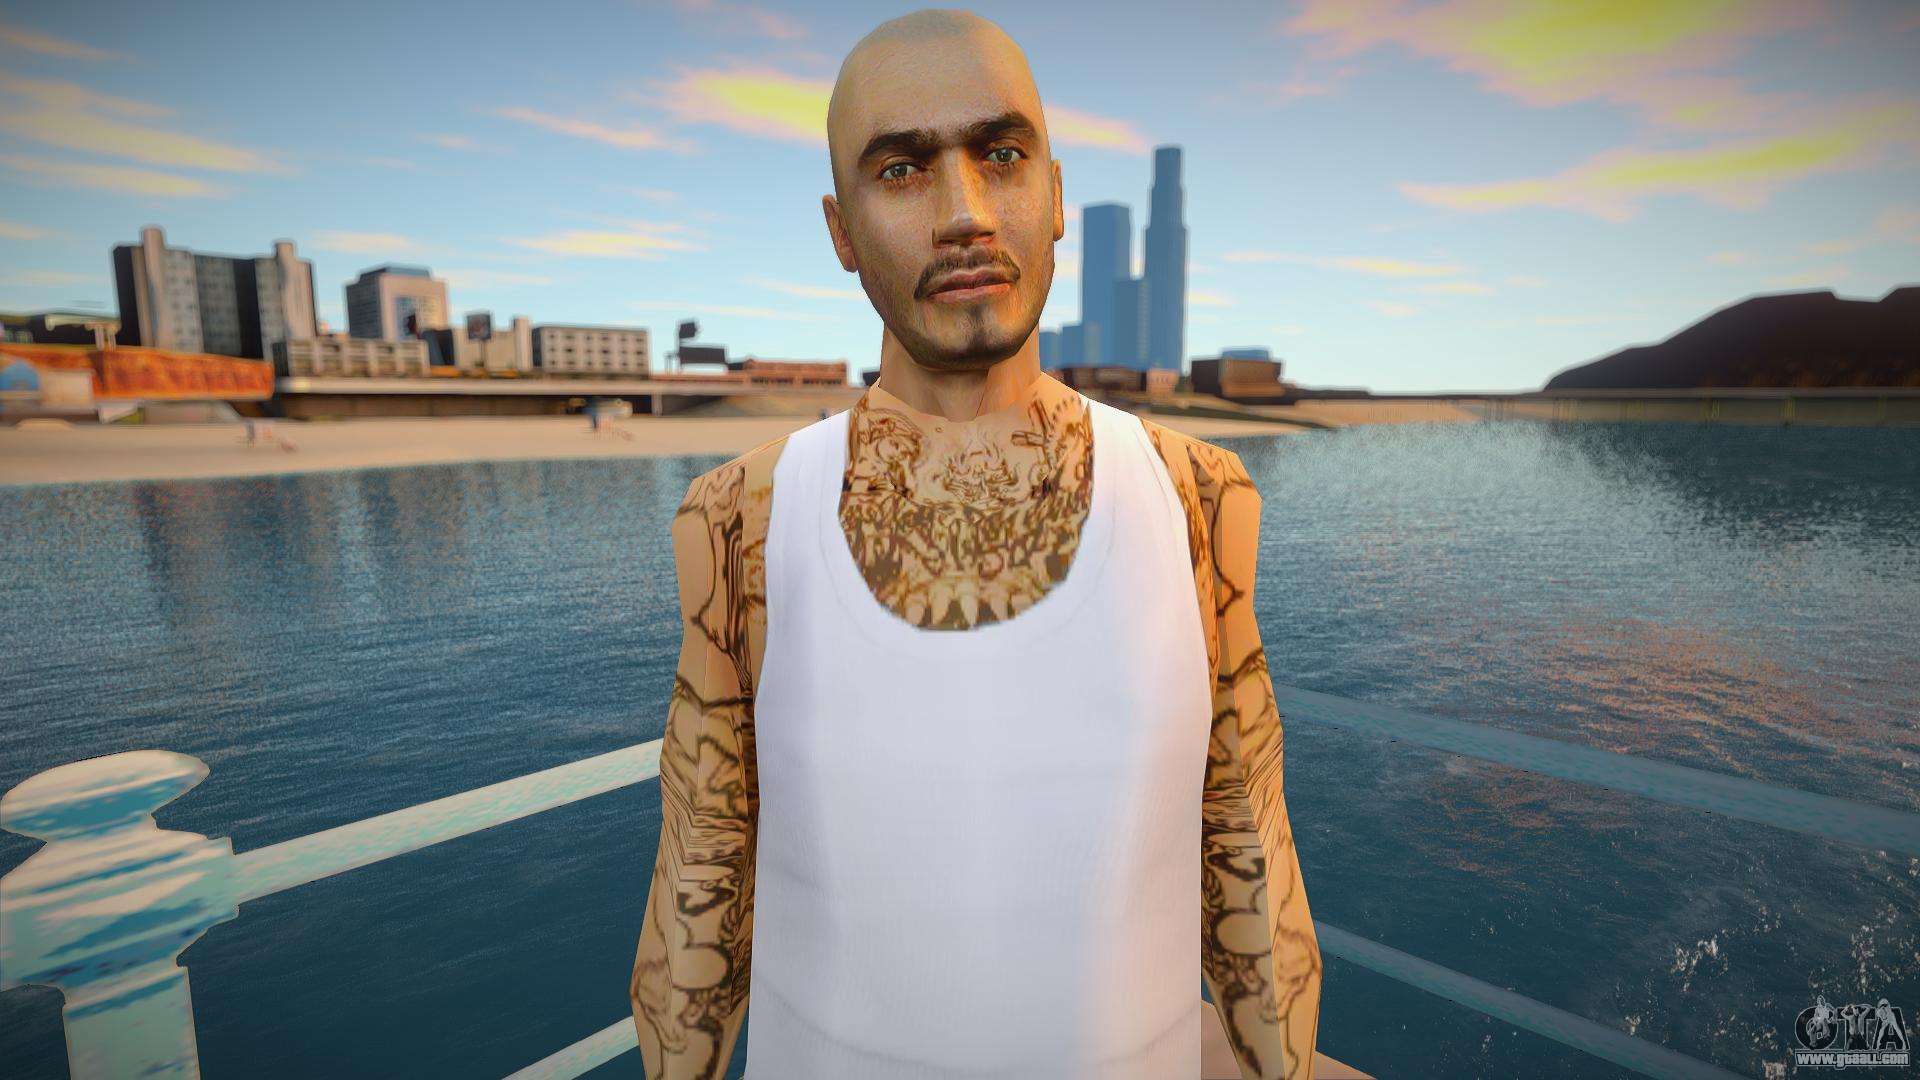 Tattooed Mexican for GTA San Andreas